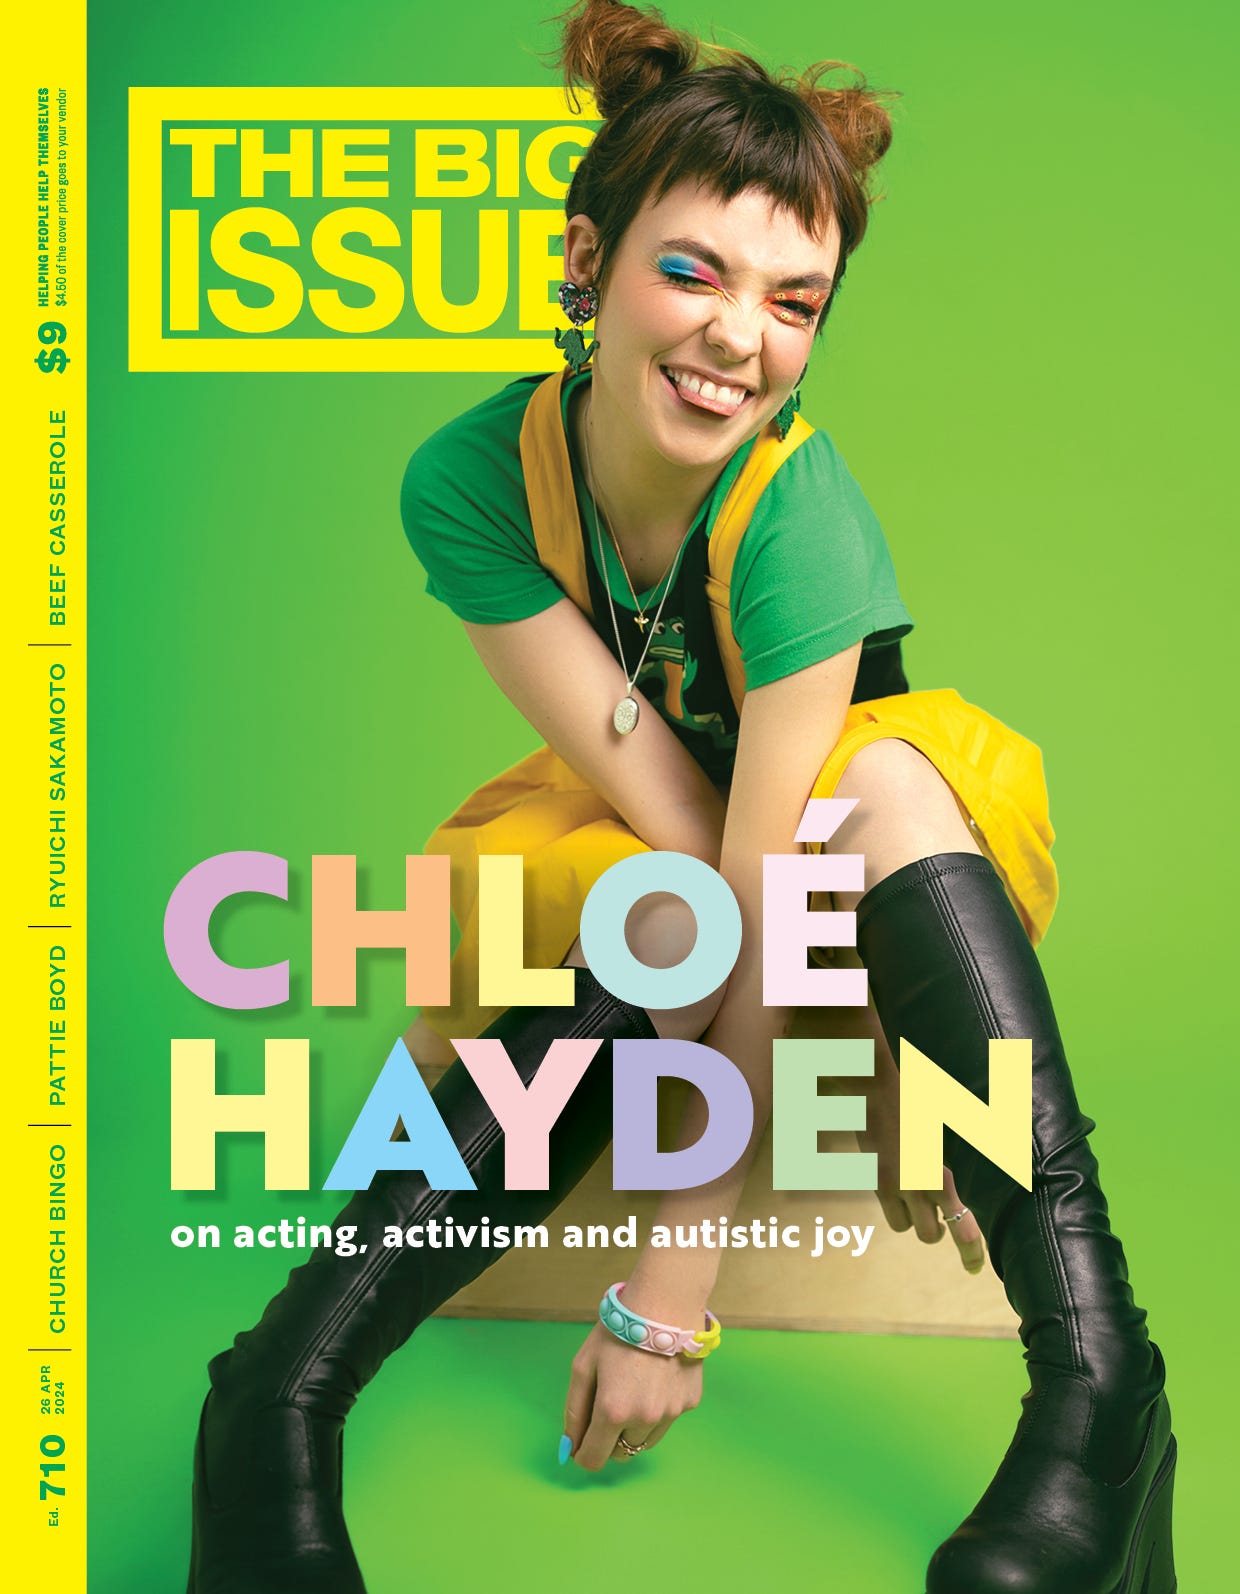 Cover of issue 710 of The Big Issue with Chloe Hayden on the cover.